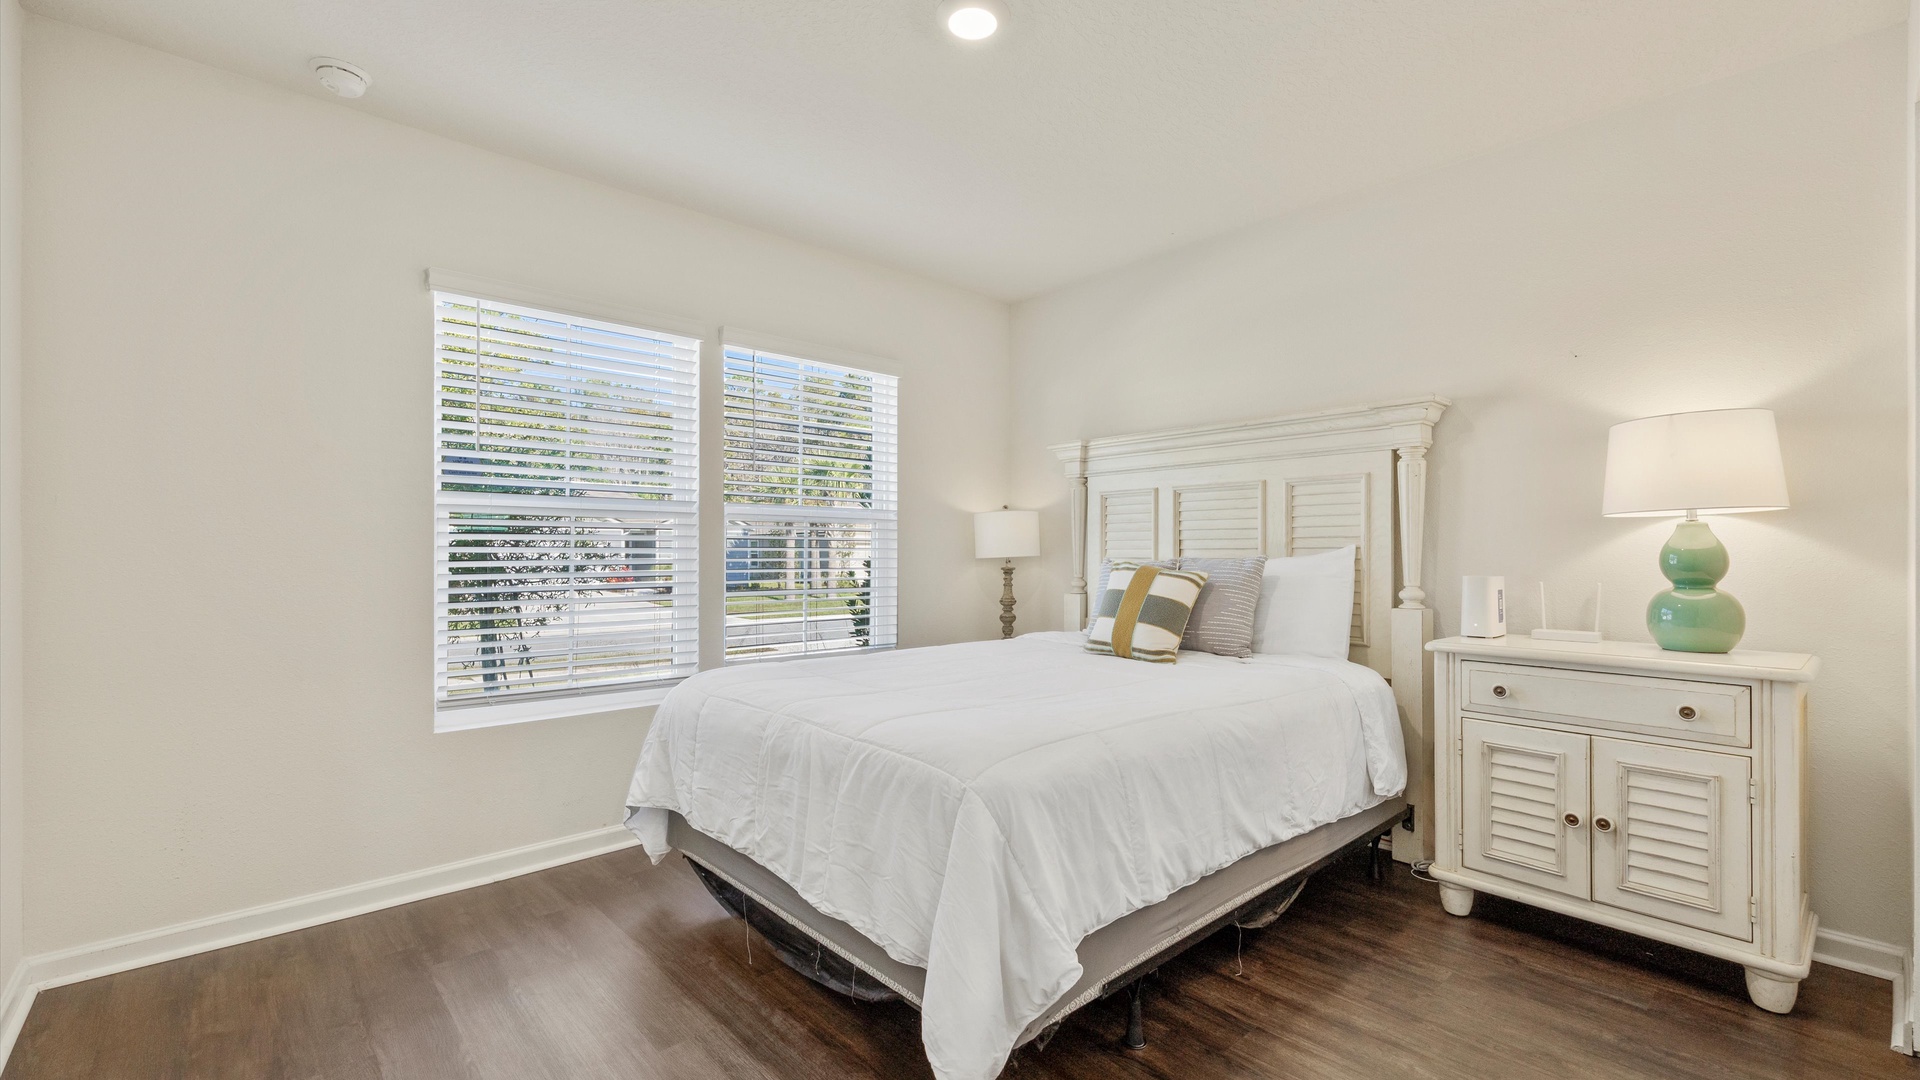 This spacious bedroom includes a queen-sized bed & Smart TV